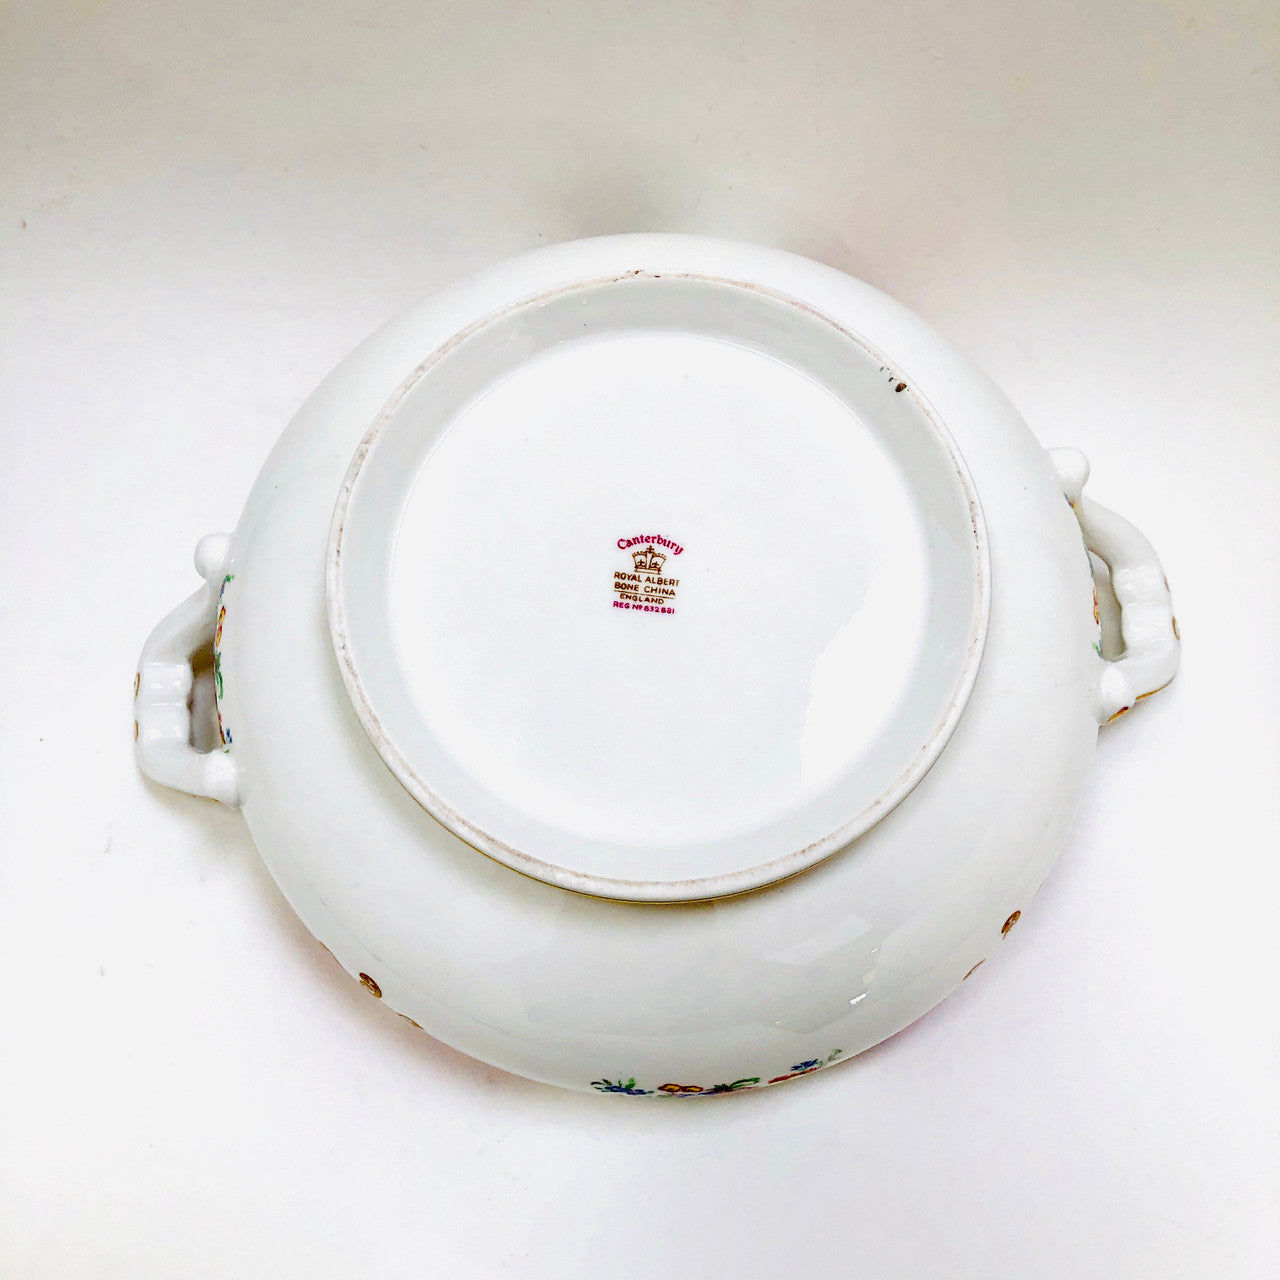 Royal Albert, Canterbury, Two handled, Vegetable, Covered, Bowl, Casserole, Vintage, England, Steampunk